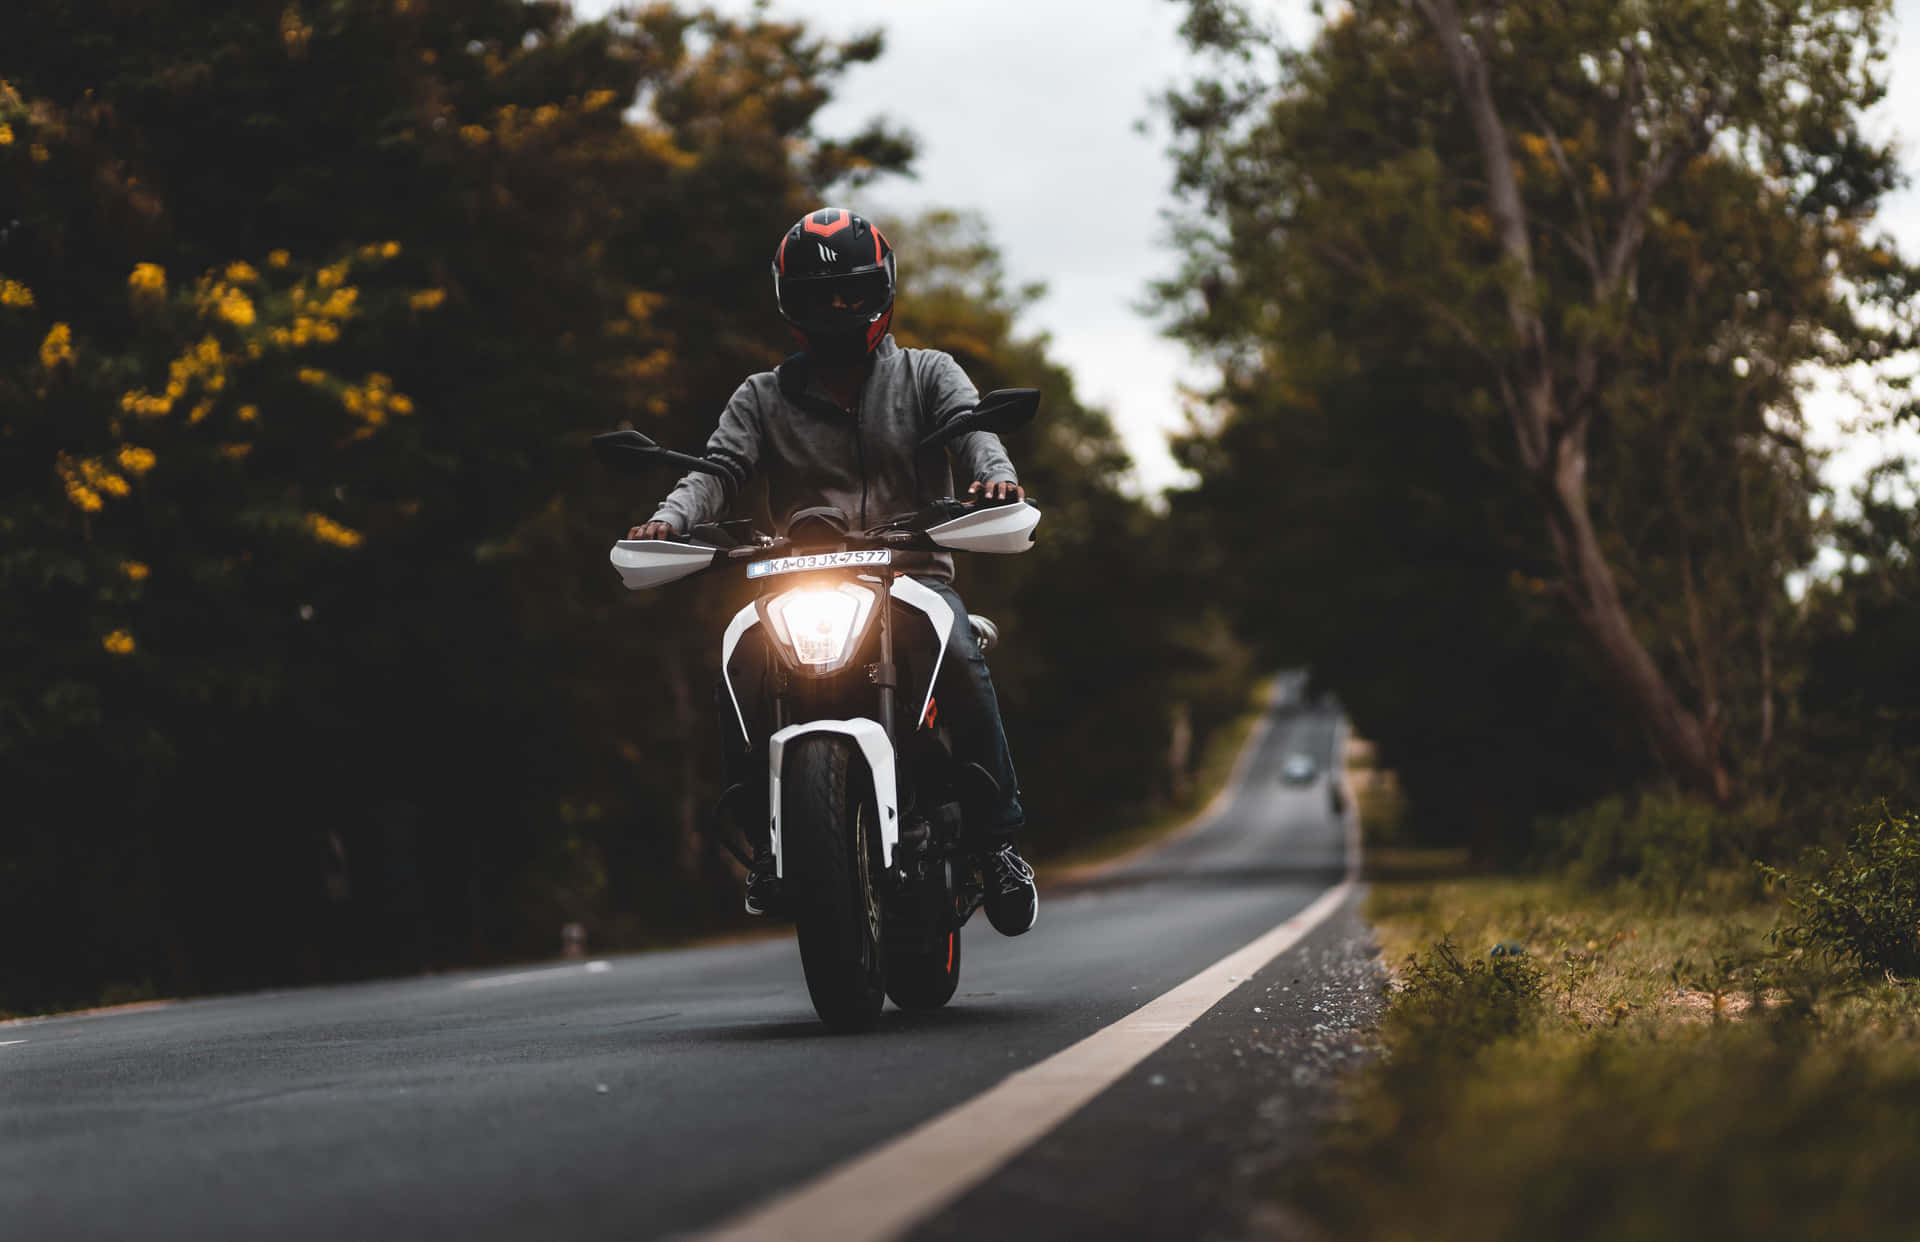 Fuel your adrenaline with the Duke 390 motorcycle.